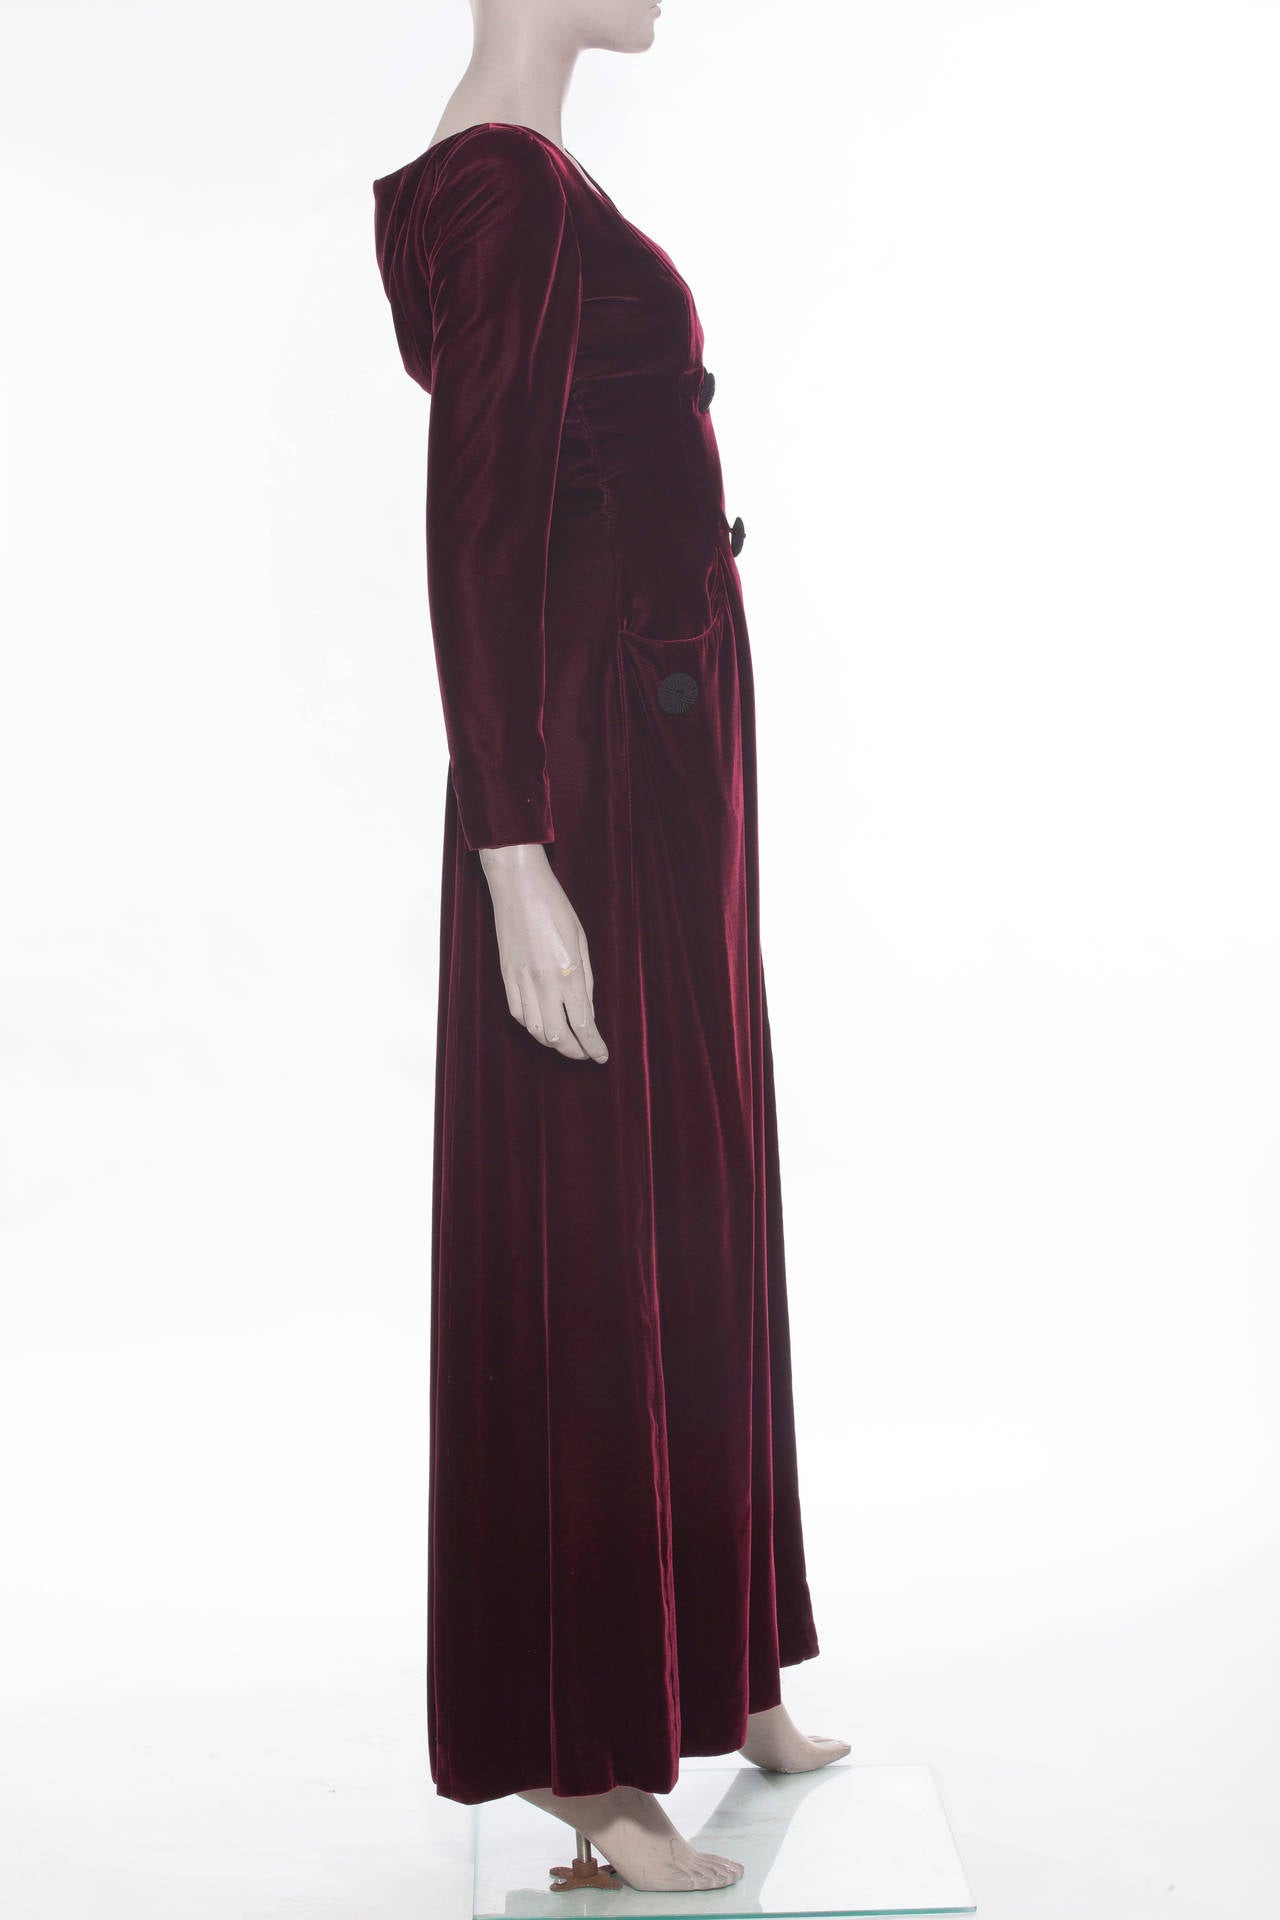 Oscar De la Renta, circa 1990's, silk velvet gown, long sleeves with zip cuffs, snap front, corded buttons, two front pockets and fully lined in silk.